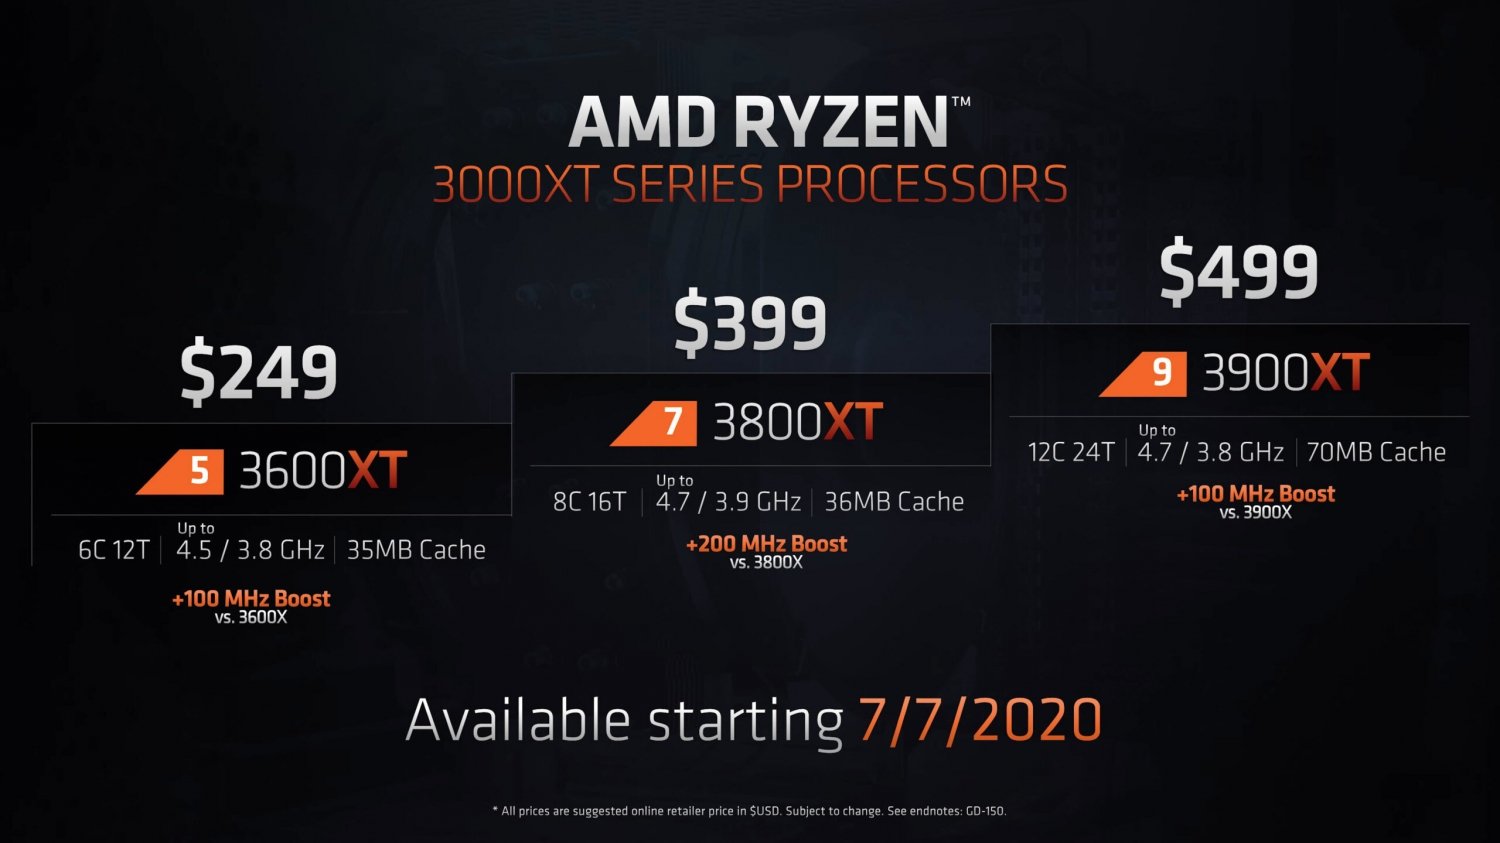 Expect around 5% faster speeds from new AMD Ryzen 9 3900XT over 3900X